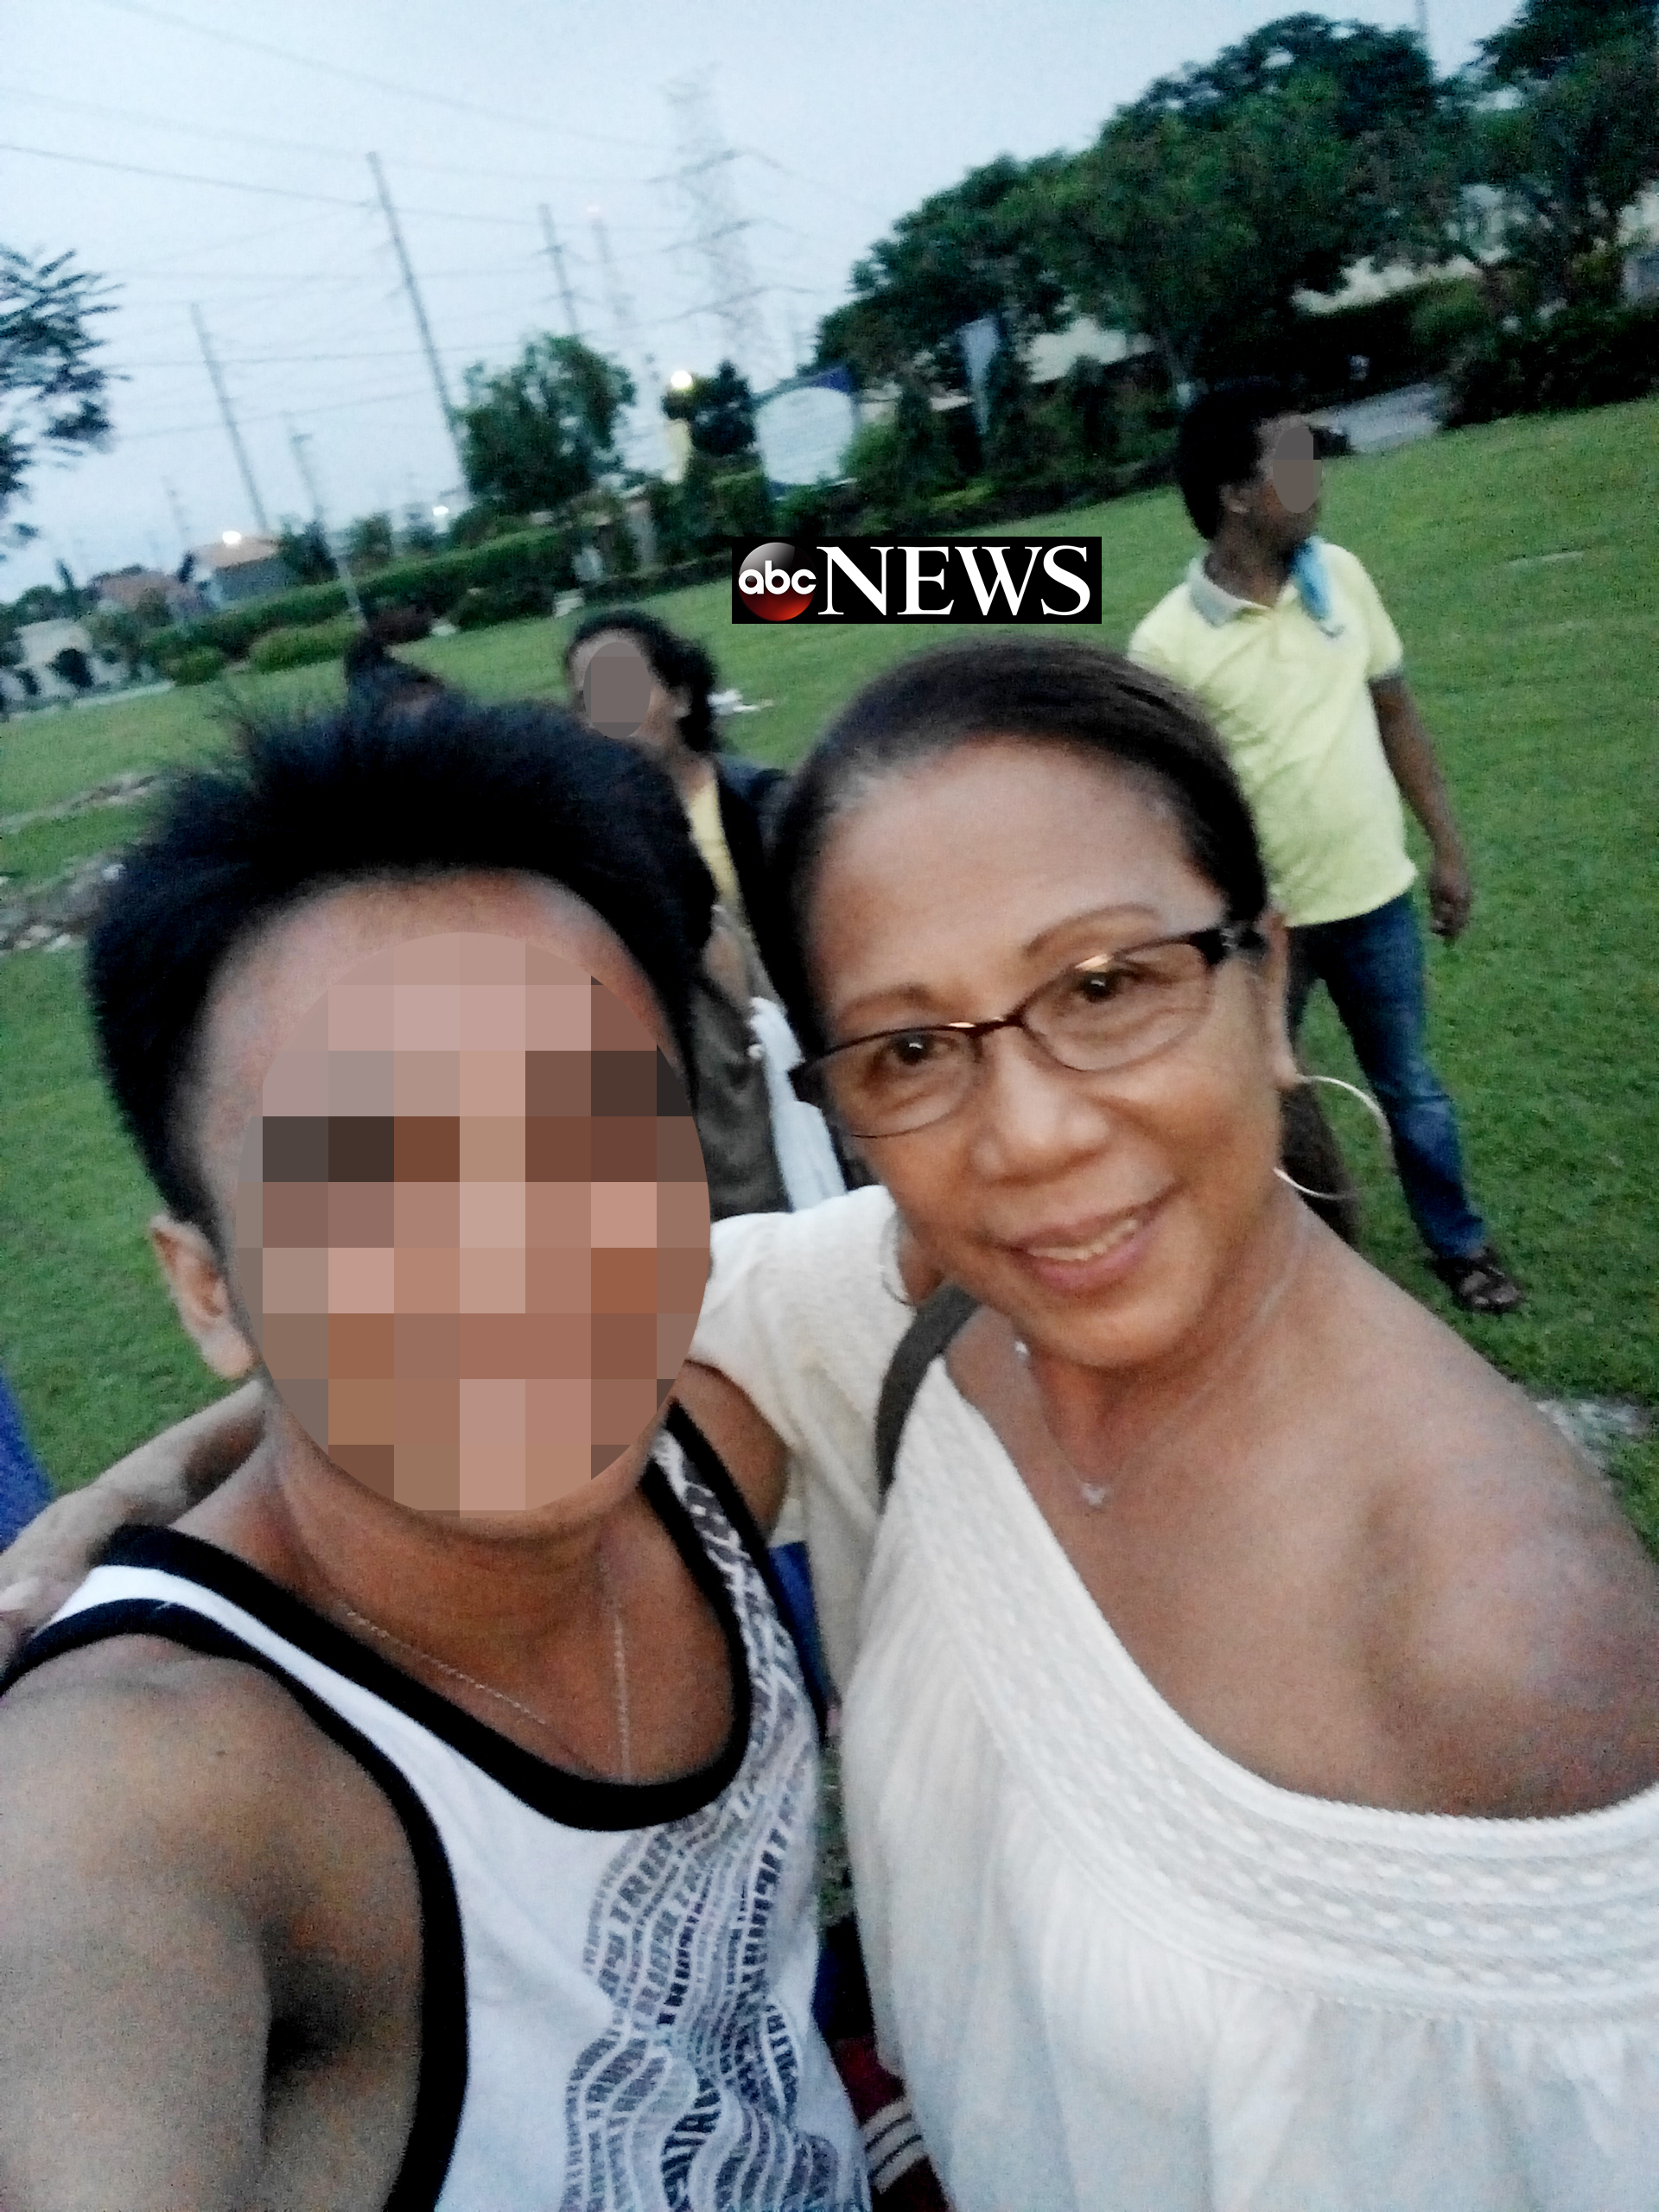 PHOTO: ABC News has obtained photos of Marilou Danley with family members in the Philippines on Sept. 29, 2017, at a family gathering at a cemetery to commemorate the birthday of a niece of Danley's who had died.